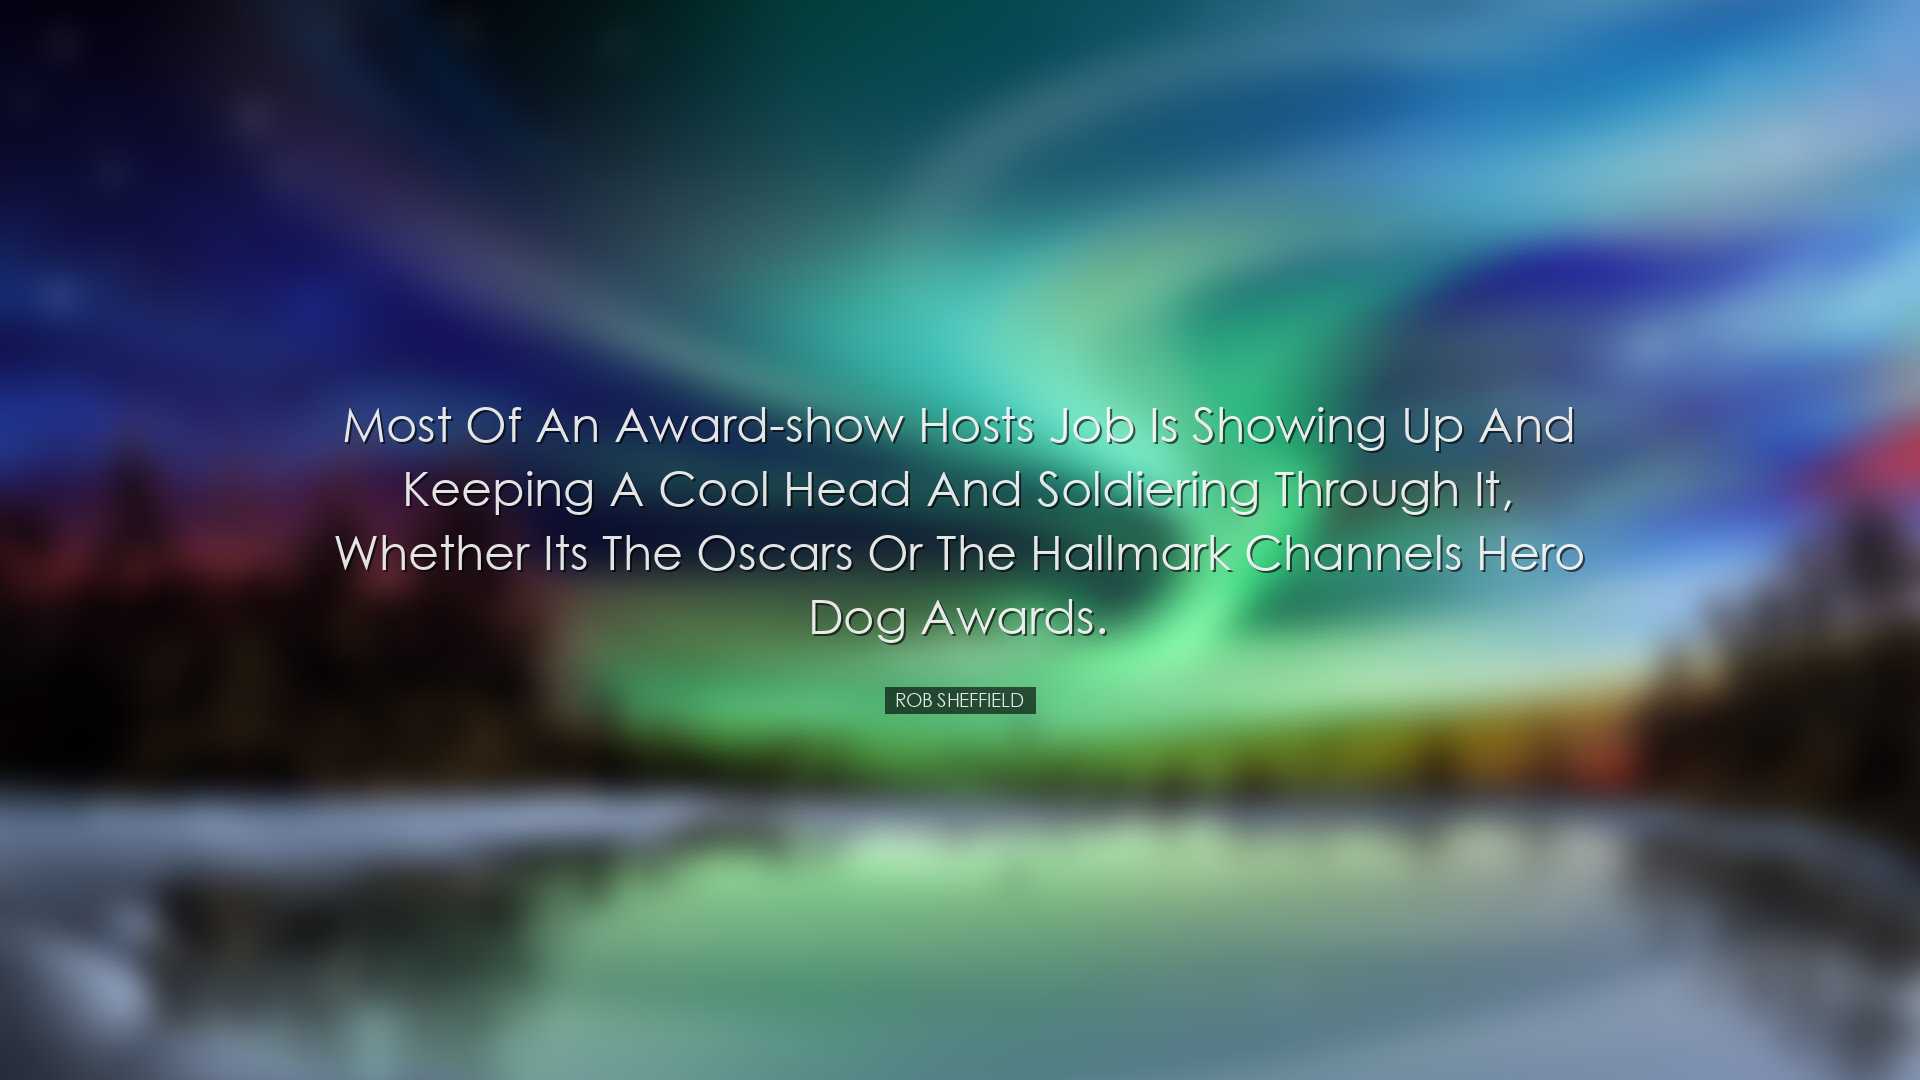 Most of an award-show hosts job is showing up and keeping a cool h